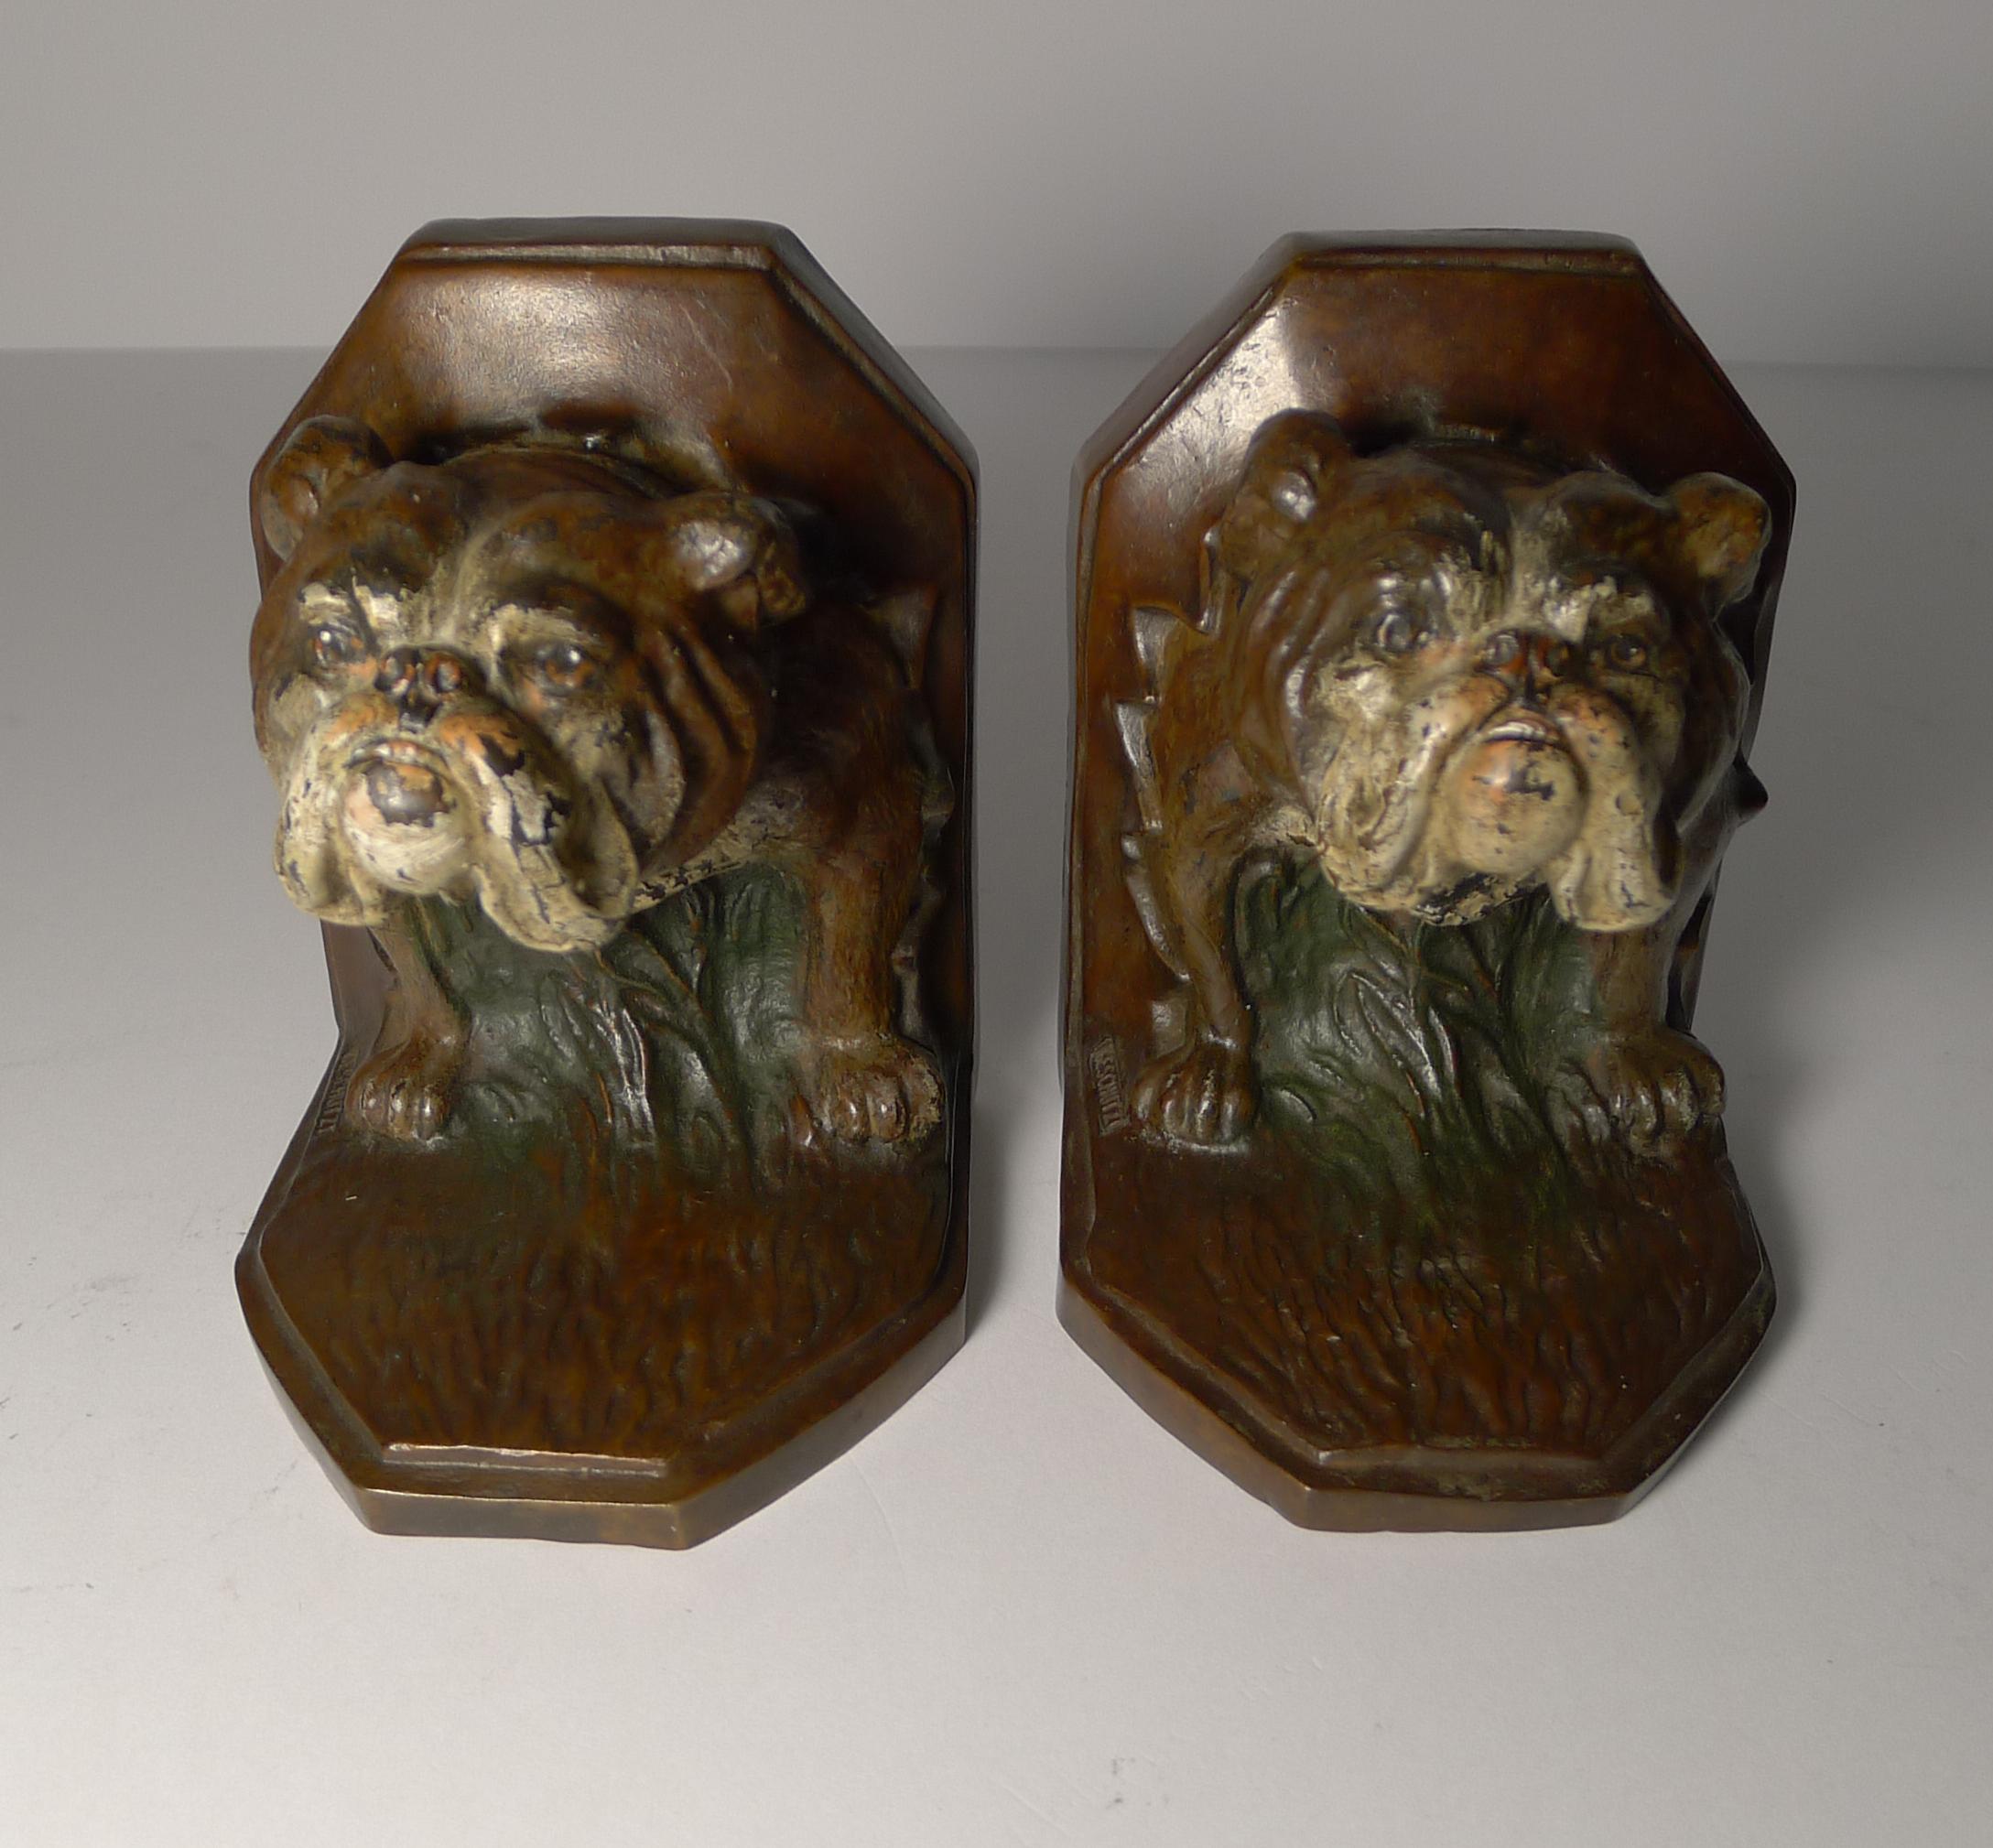 A very fine pair of Austrian cold painted bronze bookends featuring an English Bulldog on each, beautifully executed and dating to circa 1900.

Marked 